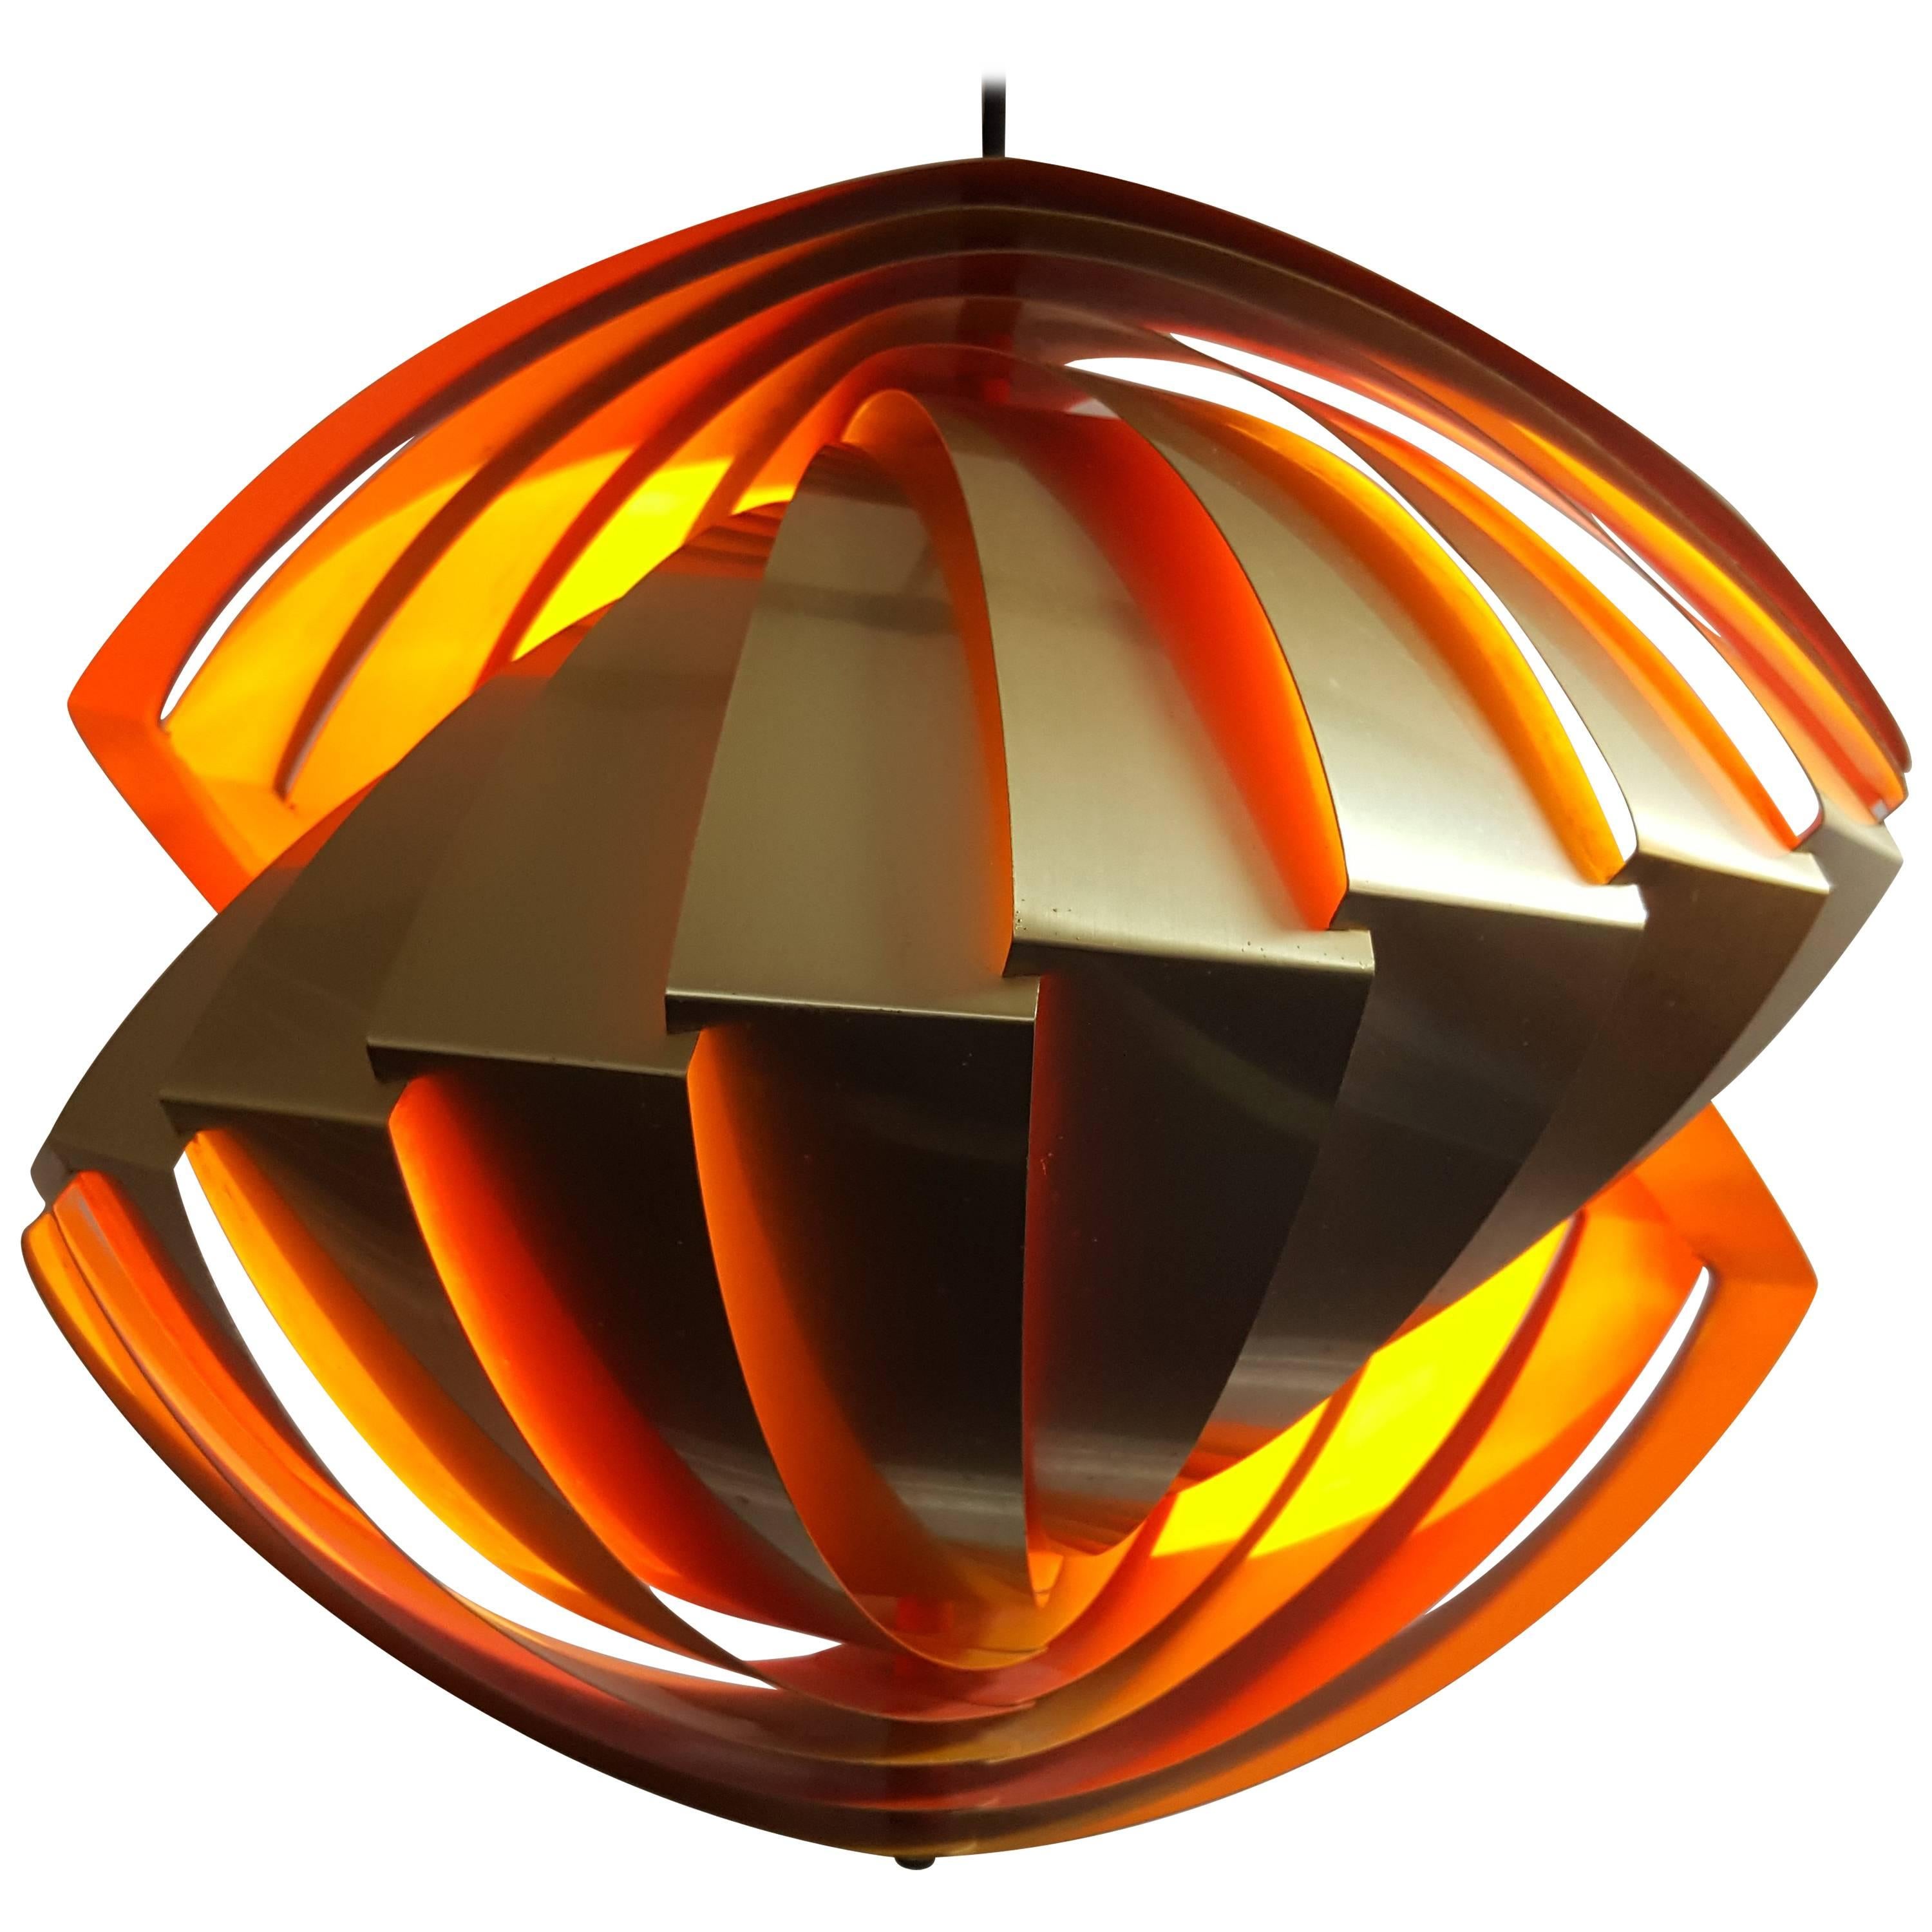 Iconic "Conch" Pendant, in Danish "Konkylie" Designed by Louis Weisdorf in 1